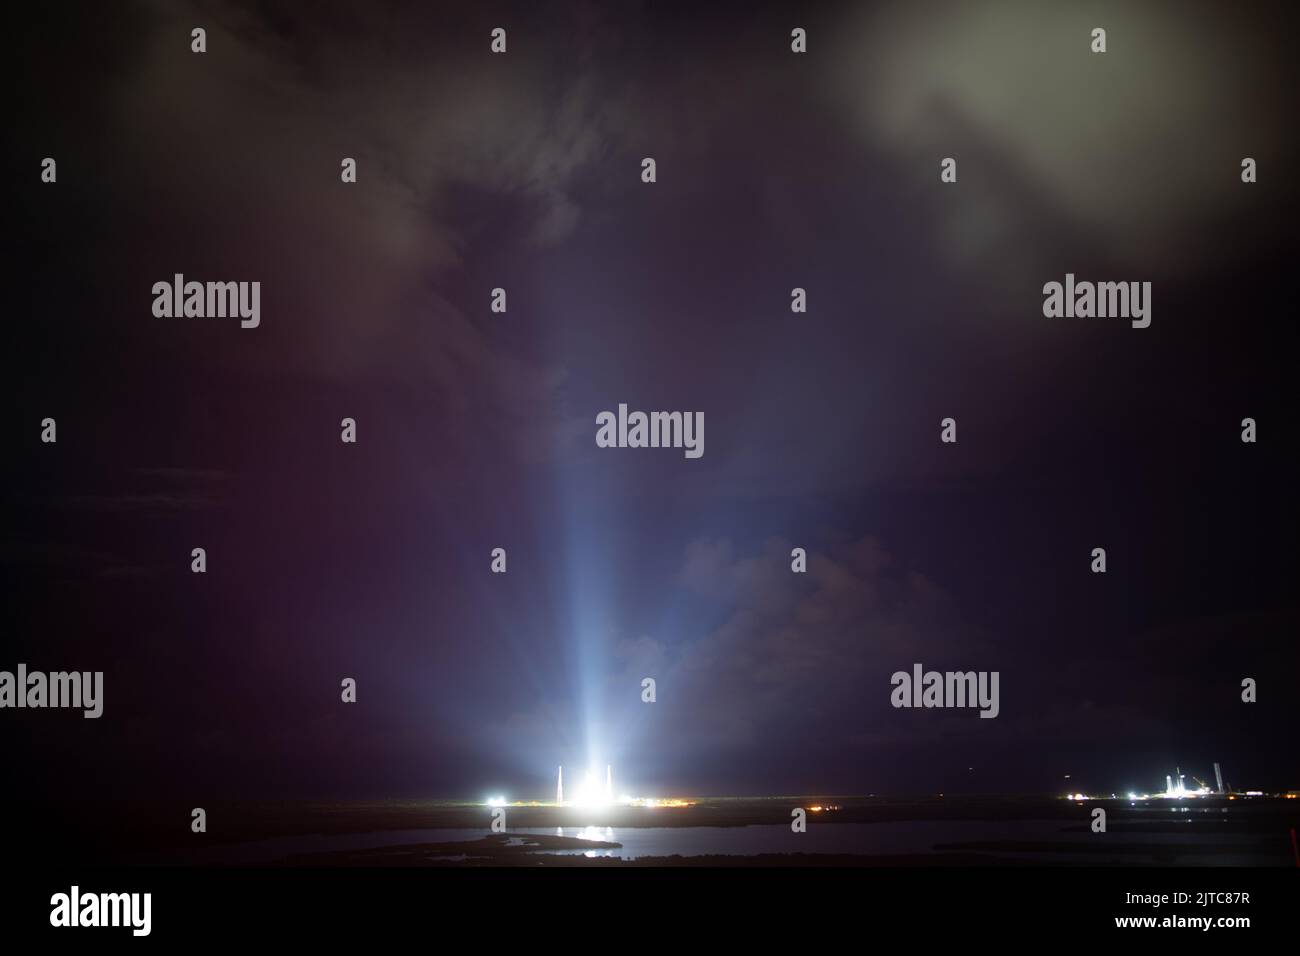 Kennedy Space Center, United States of America. 29 August, 2022. Illuminated by spotlights the NASA Space Launch System rocket with the Orion spacecraft during preflight on Launch Complex 39B at the Kennedy Space Center, August 29, 2022, in Cape Canaveral, Florida. The countdown for the un-crewed flight test was halted after a problem with the fuel system caused an extended delay. Credit: Joel Kowsky/NASA/Alamy Live News Stock Photo